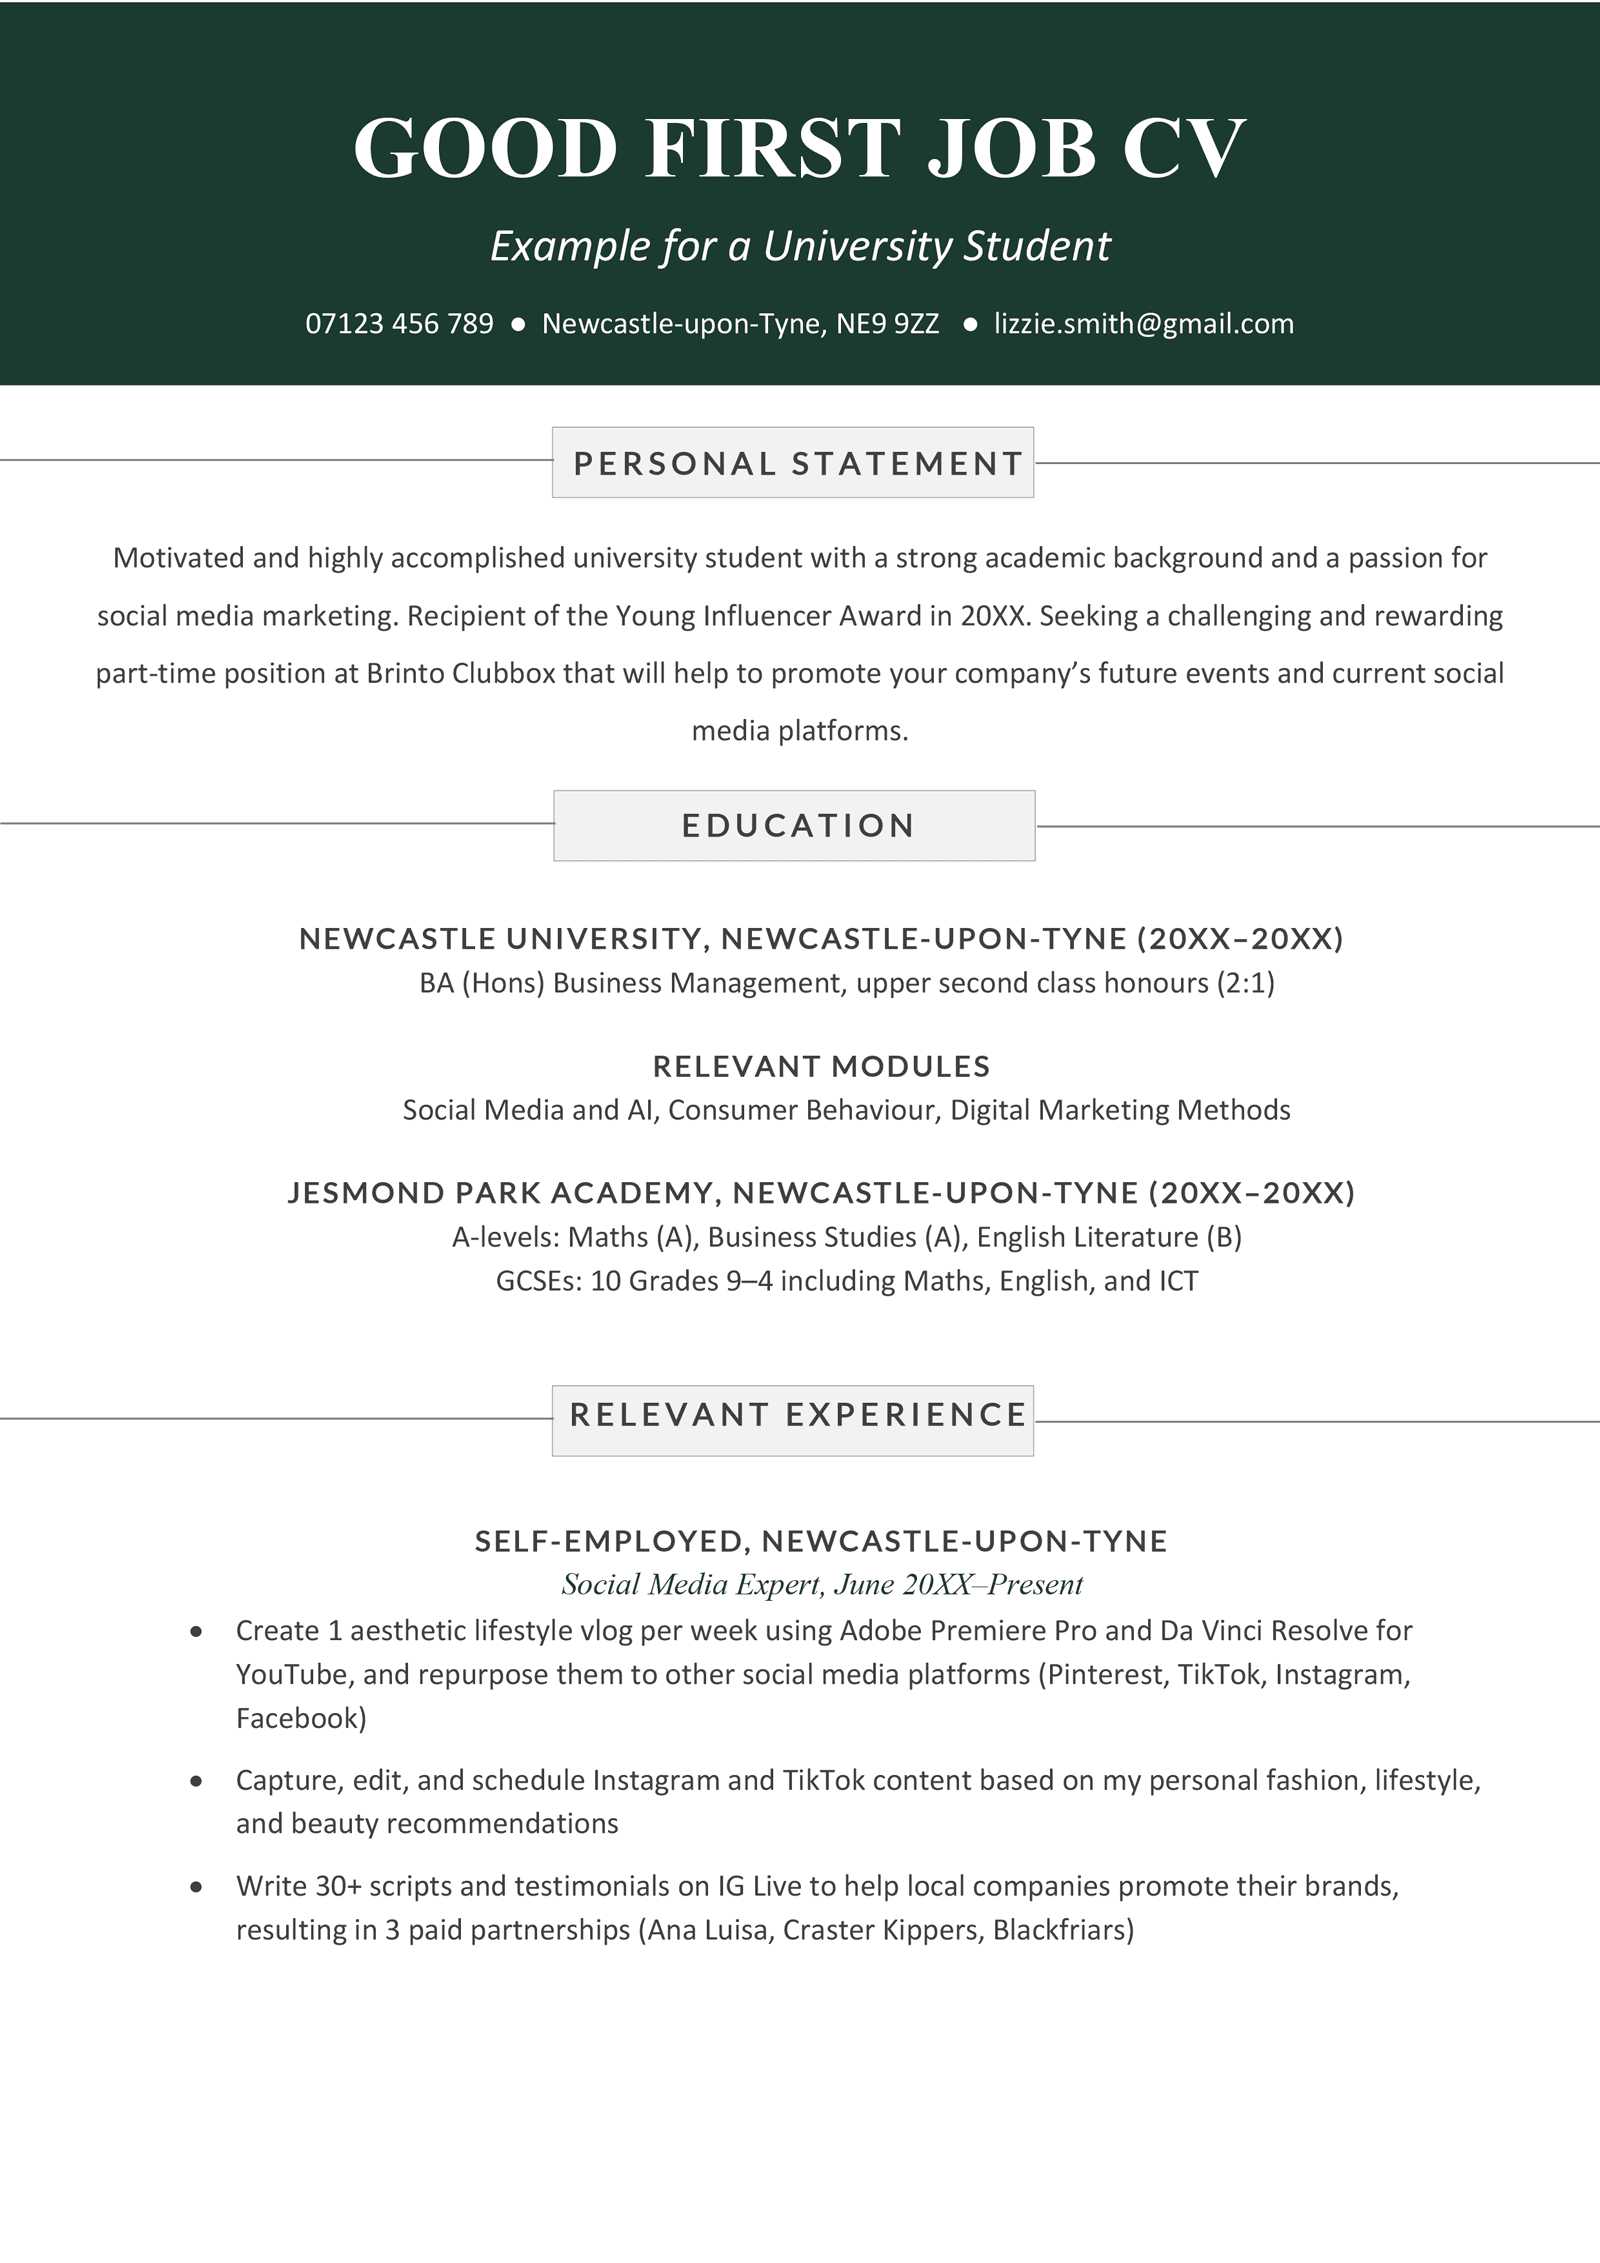 An example of a good first job CV for a university student on a template with a dark green header to accentuate the applicant's name and contact details